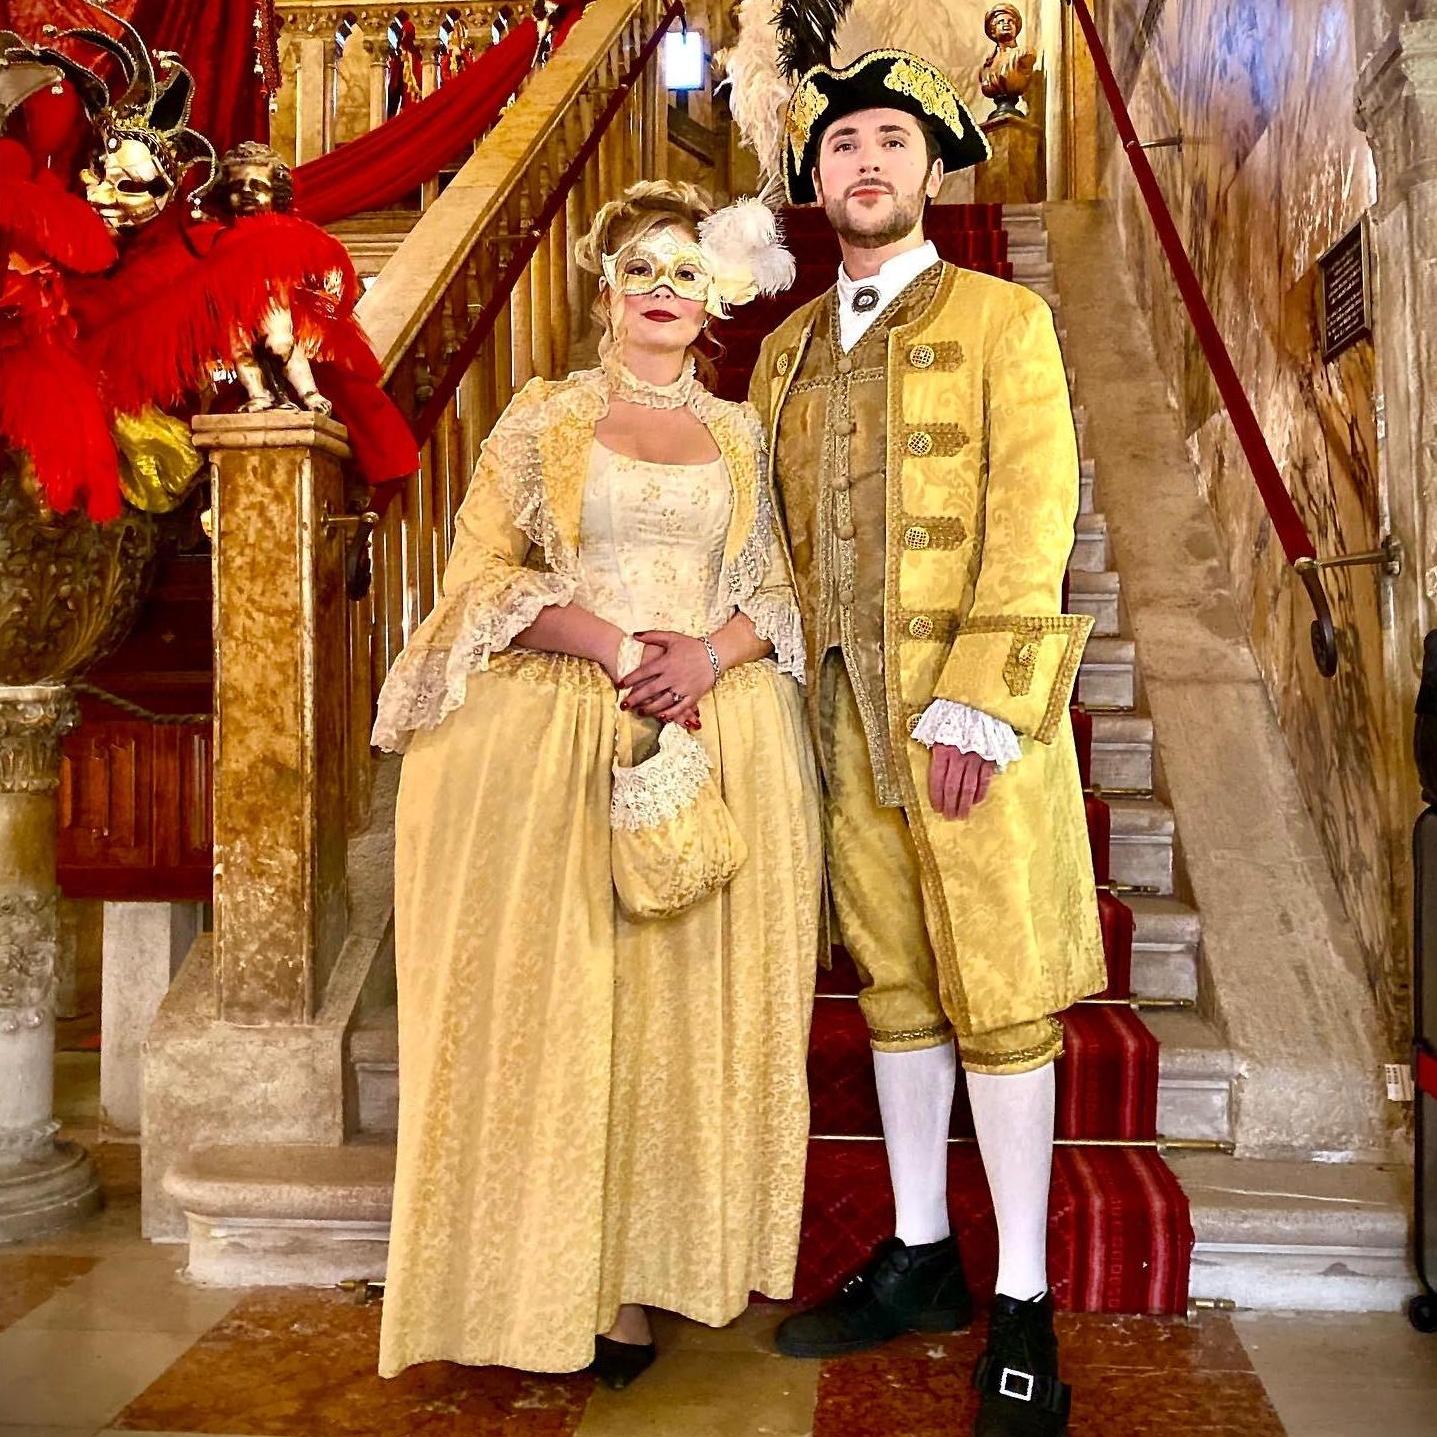 Dressed up in full costume - tights and makeup included - for the Carnival Ball in Venice
2020